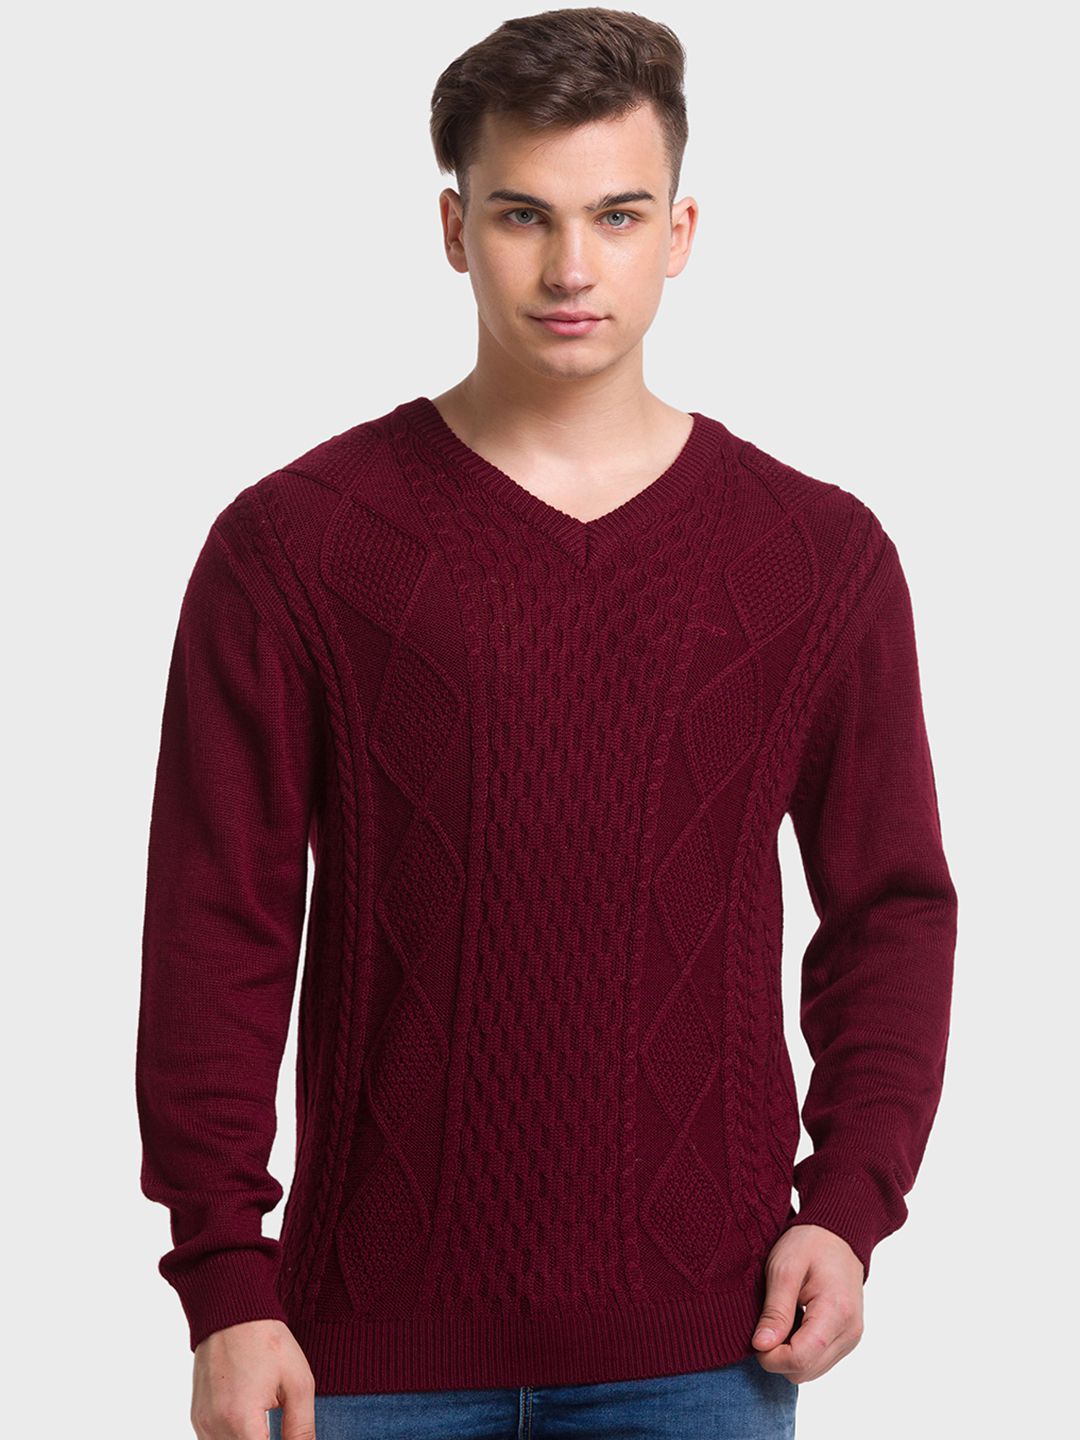     			Colorplus Acrylic V-Neck Men's Full Sleeves Pullover Sweater - Red ( Pack of 1 )